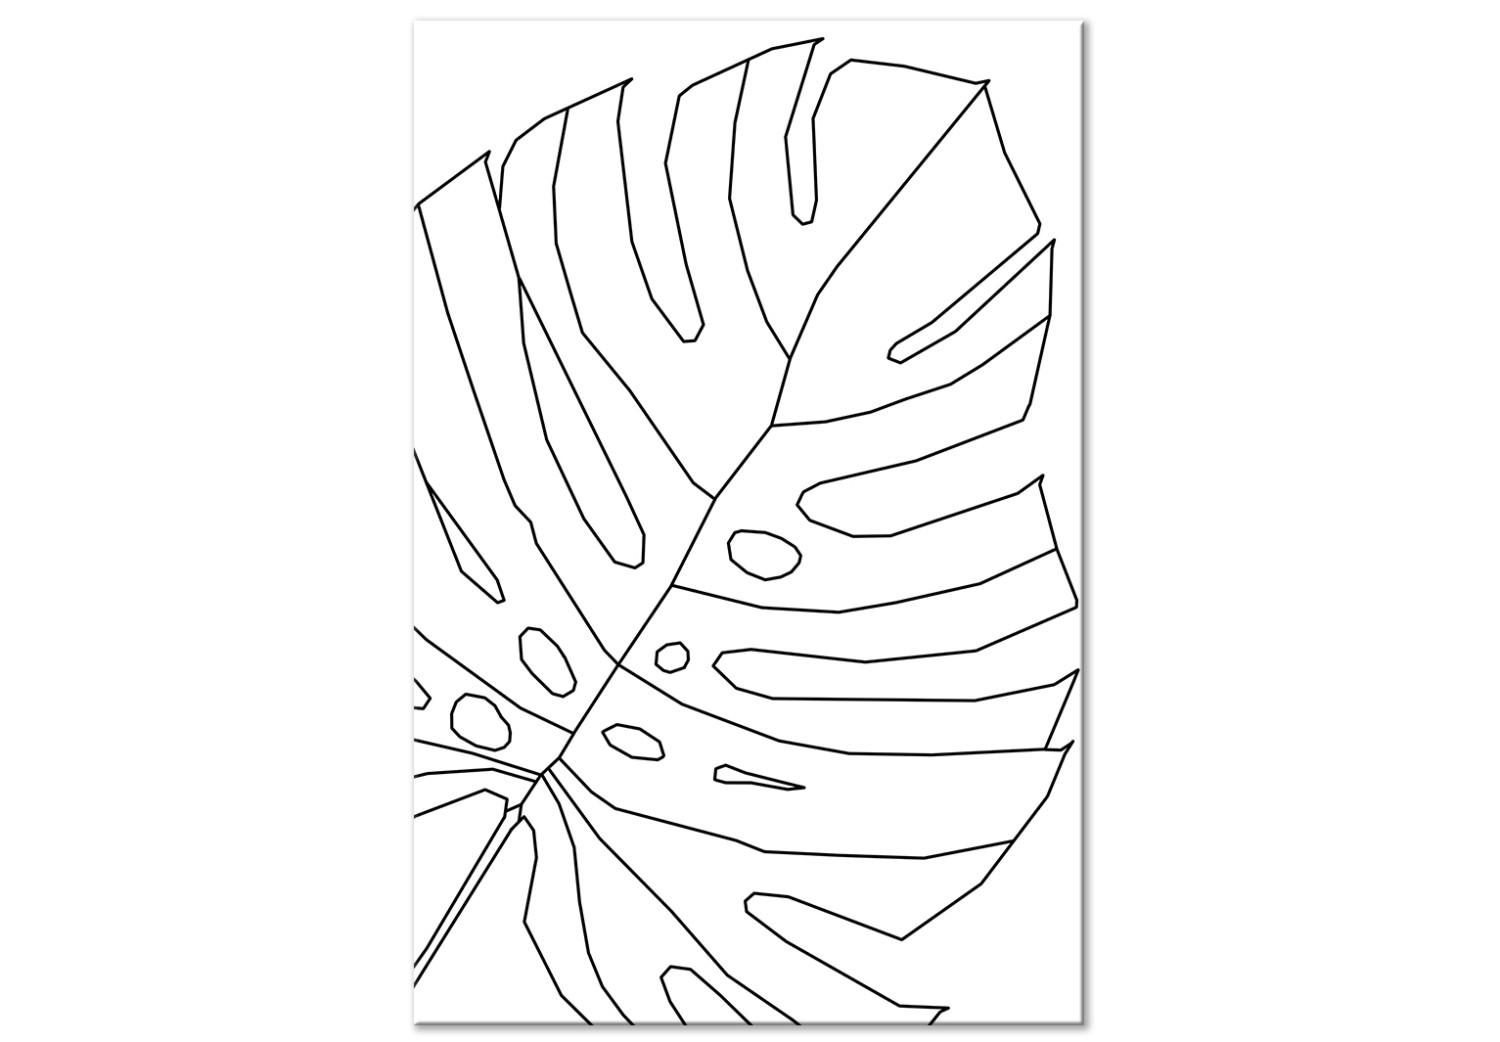 Canvas Black monstera leaf contours - abstraction on a white background